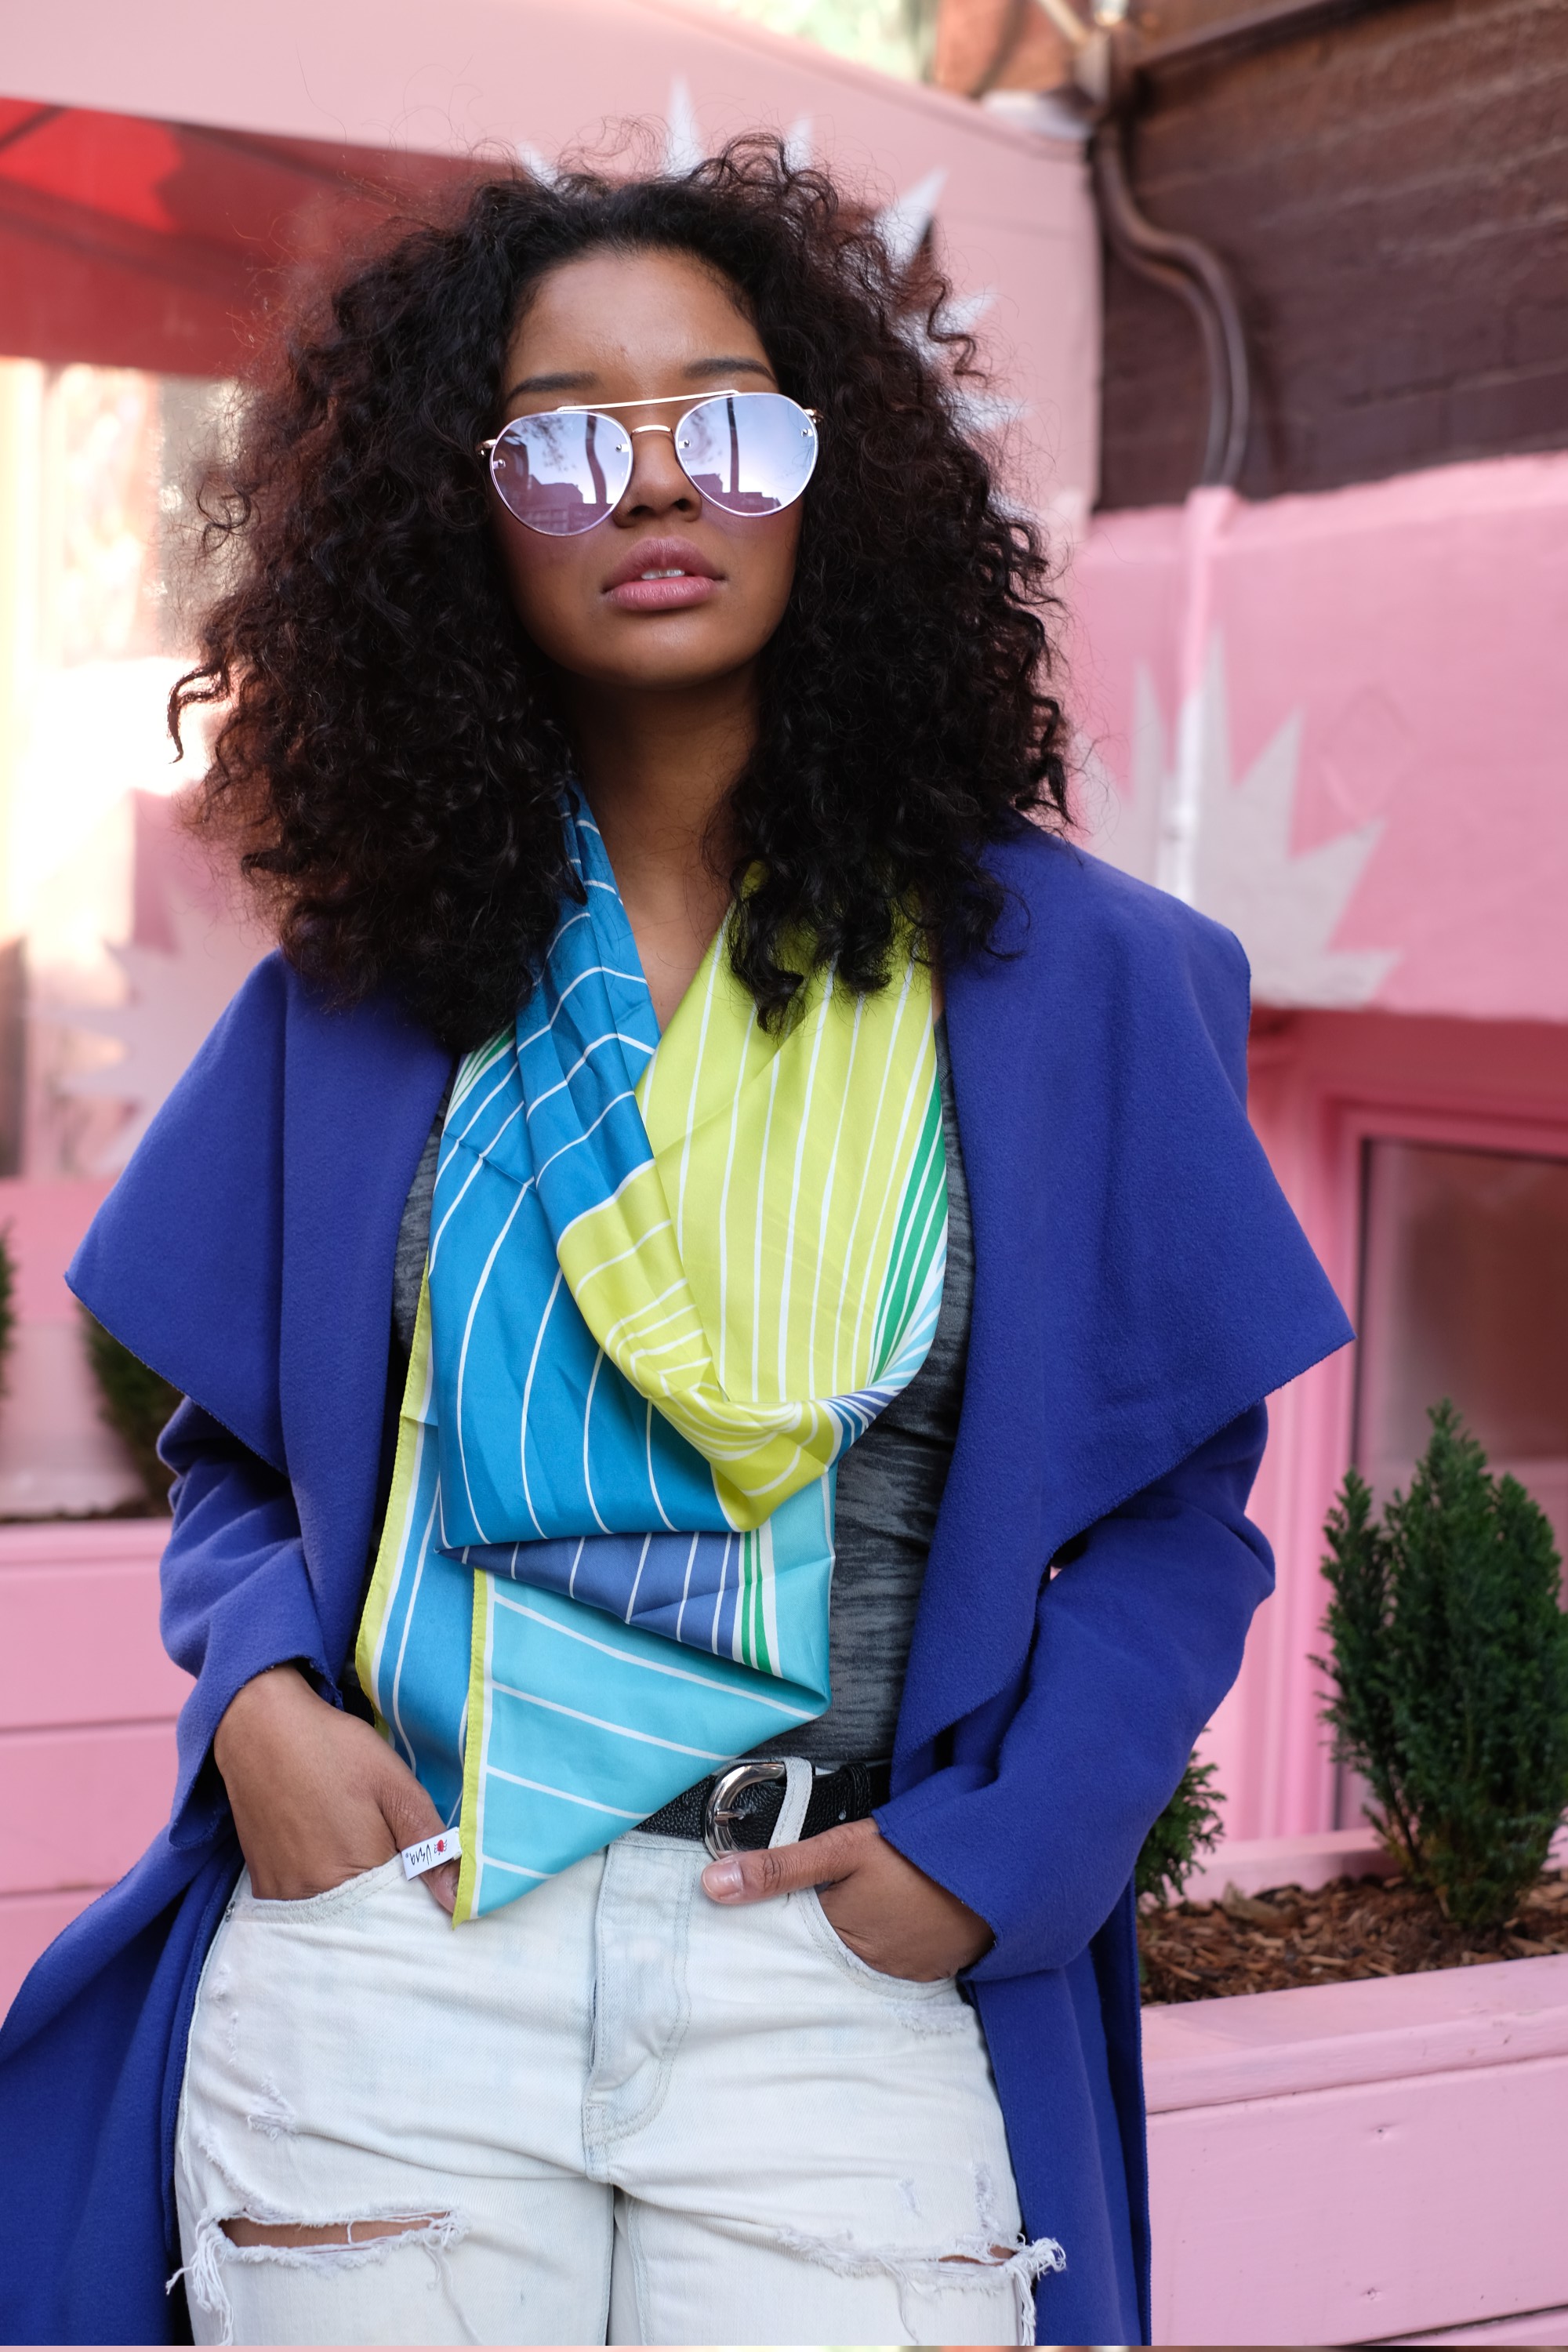 girl in blue coat by pink storefront